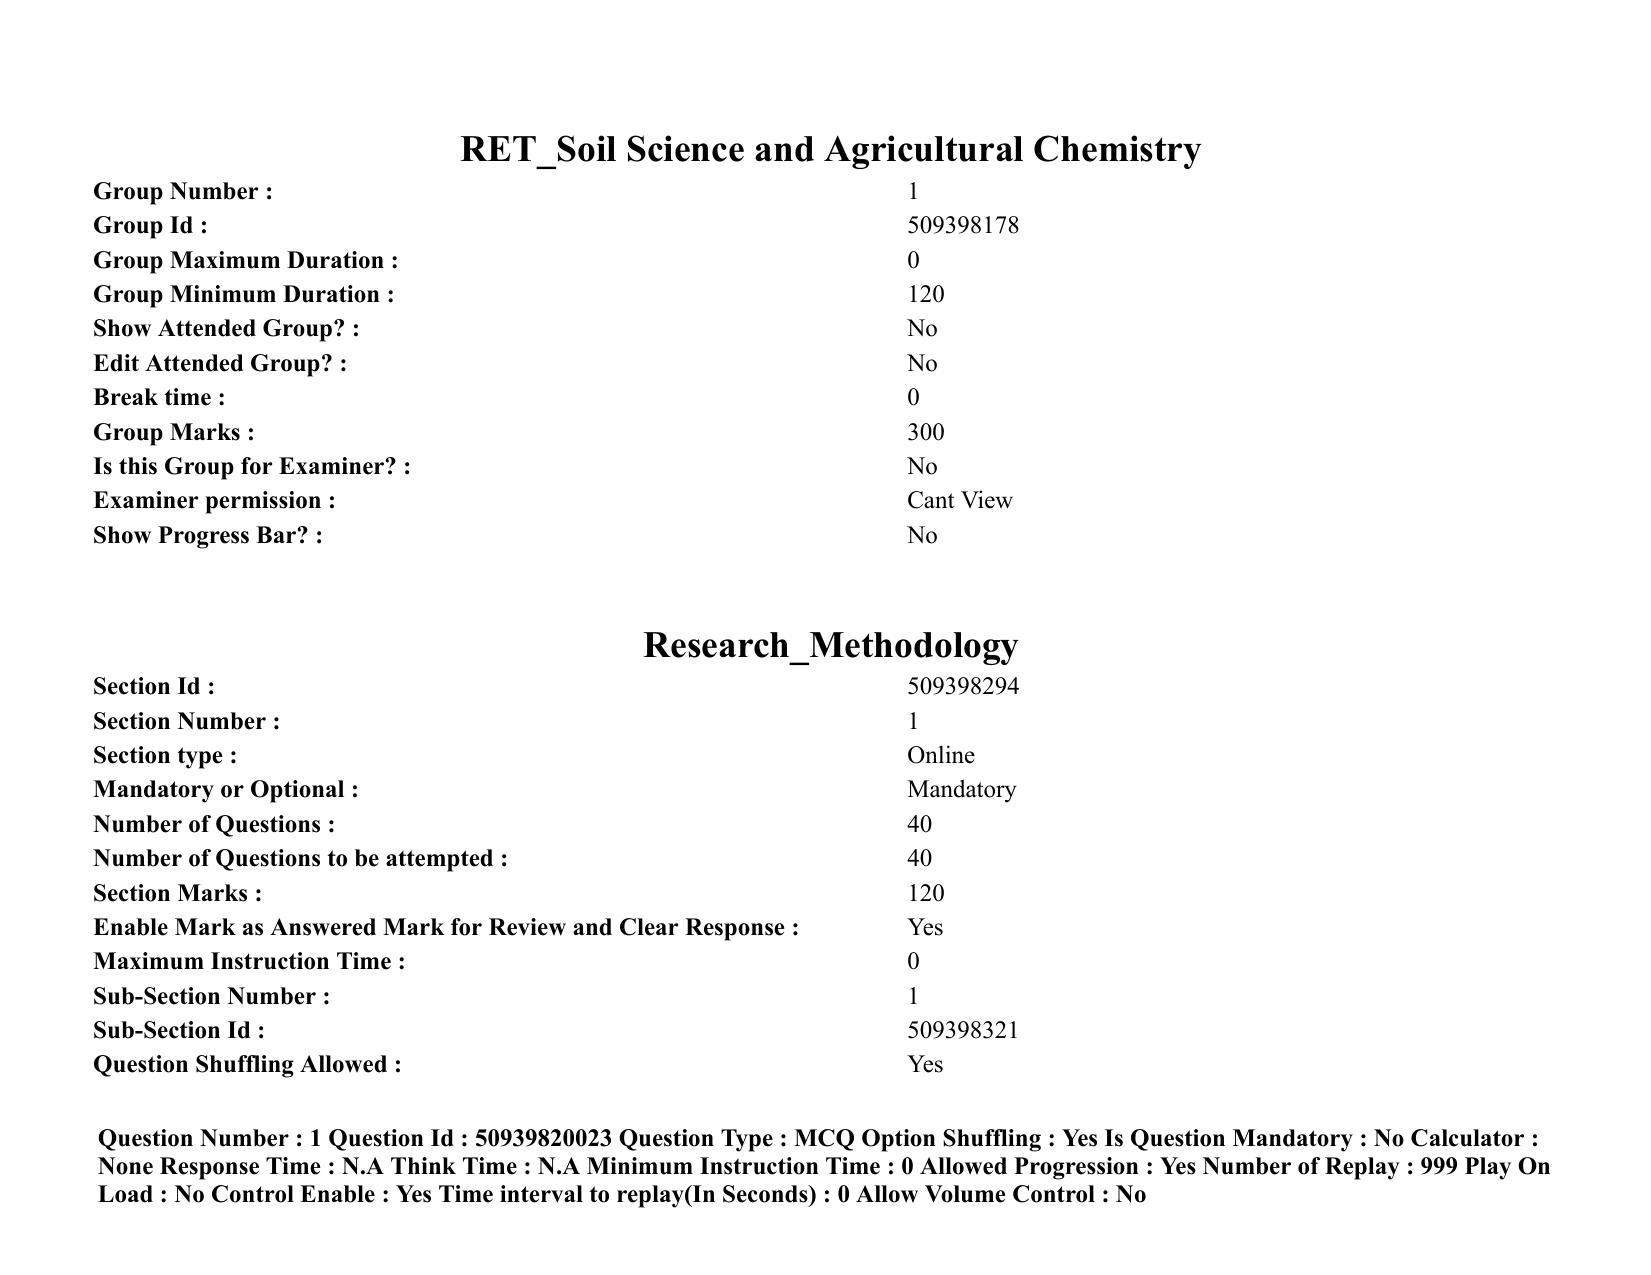 BHU RET Soil Science and Agricultural Chemistry 2021 Question Paper - Page 2